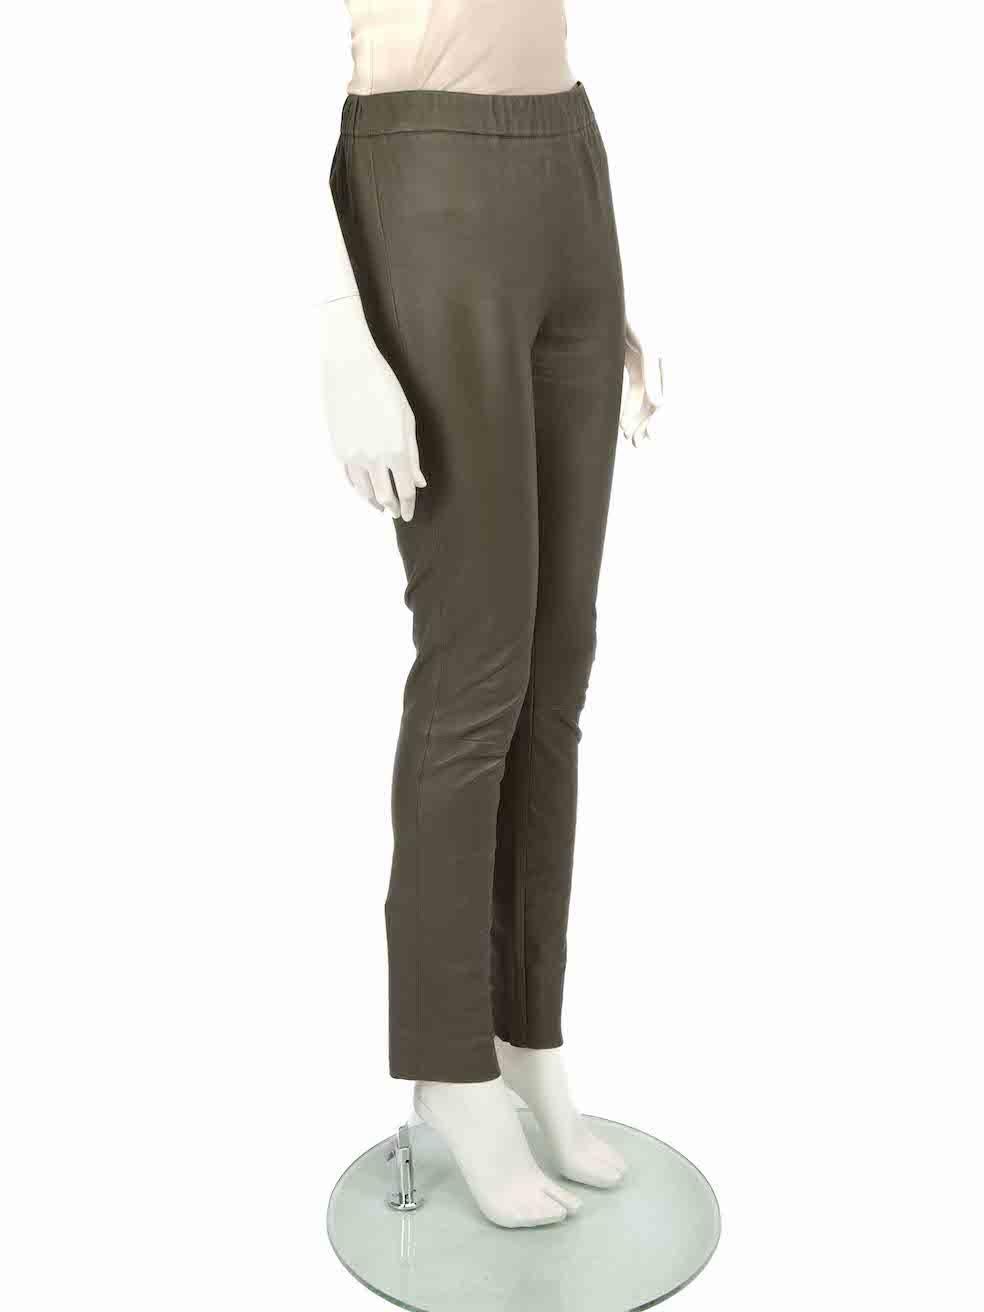 CONDITION is Very good. Hardly any visible wear to trousers is evident on this used Divine Cashmere designer resale item.
 
 
 
 Details
 
 
 Green
 
 Leather
 
 Skinny trousers
 
 Mid rise
 
 Stretchy
 
 Elasticated waistband
 
 
 
 
 
 Made in